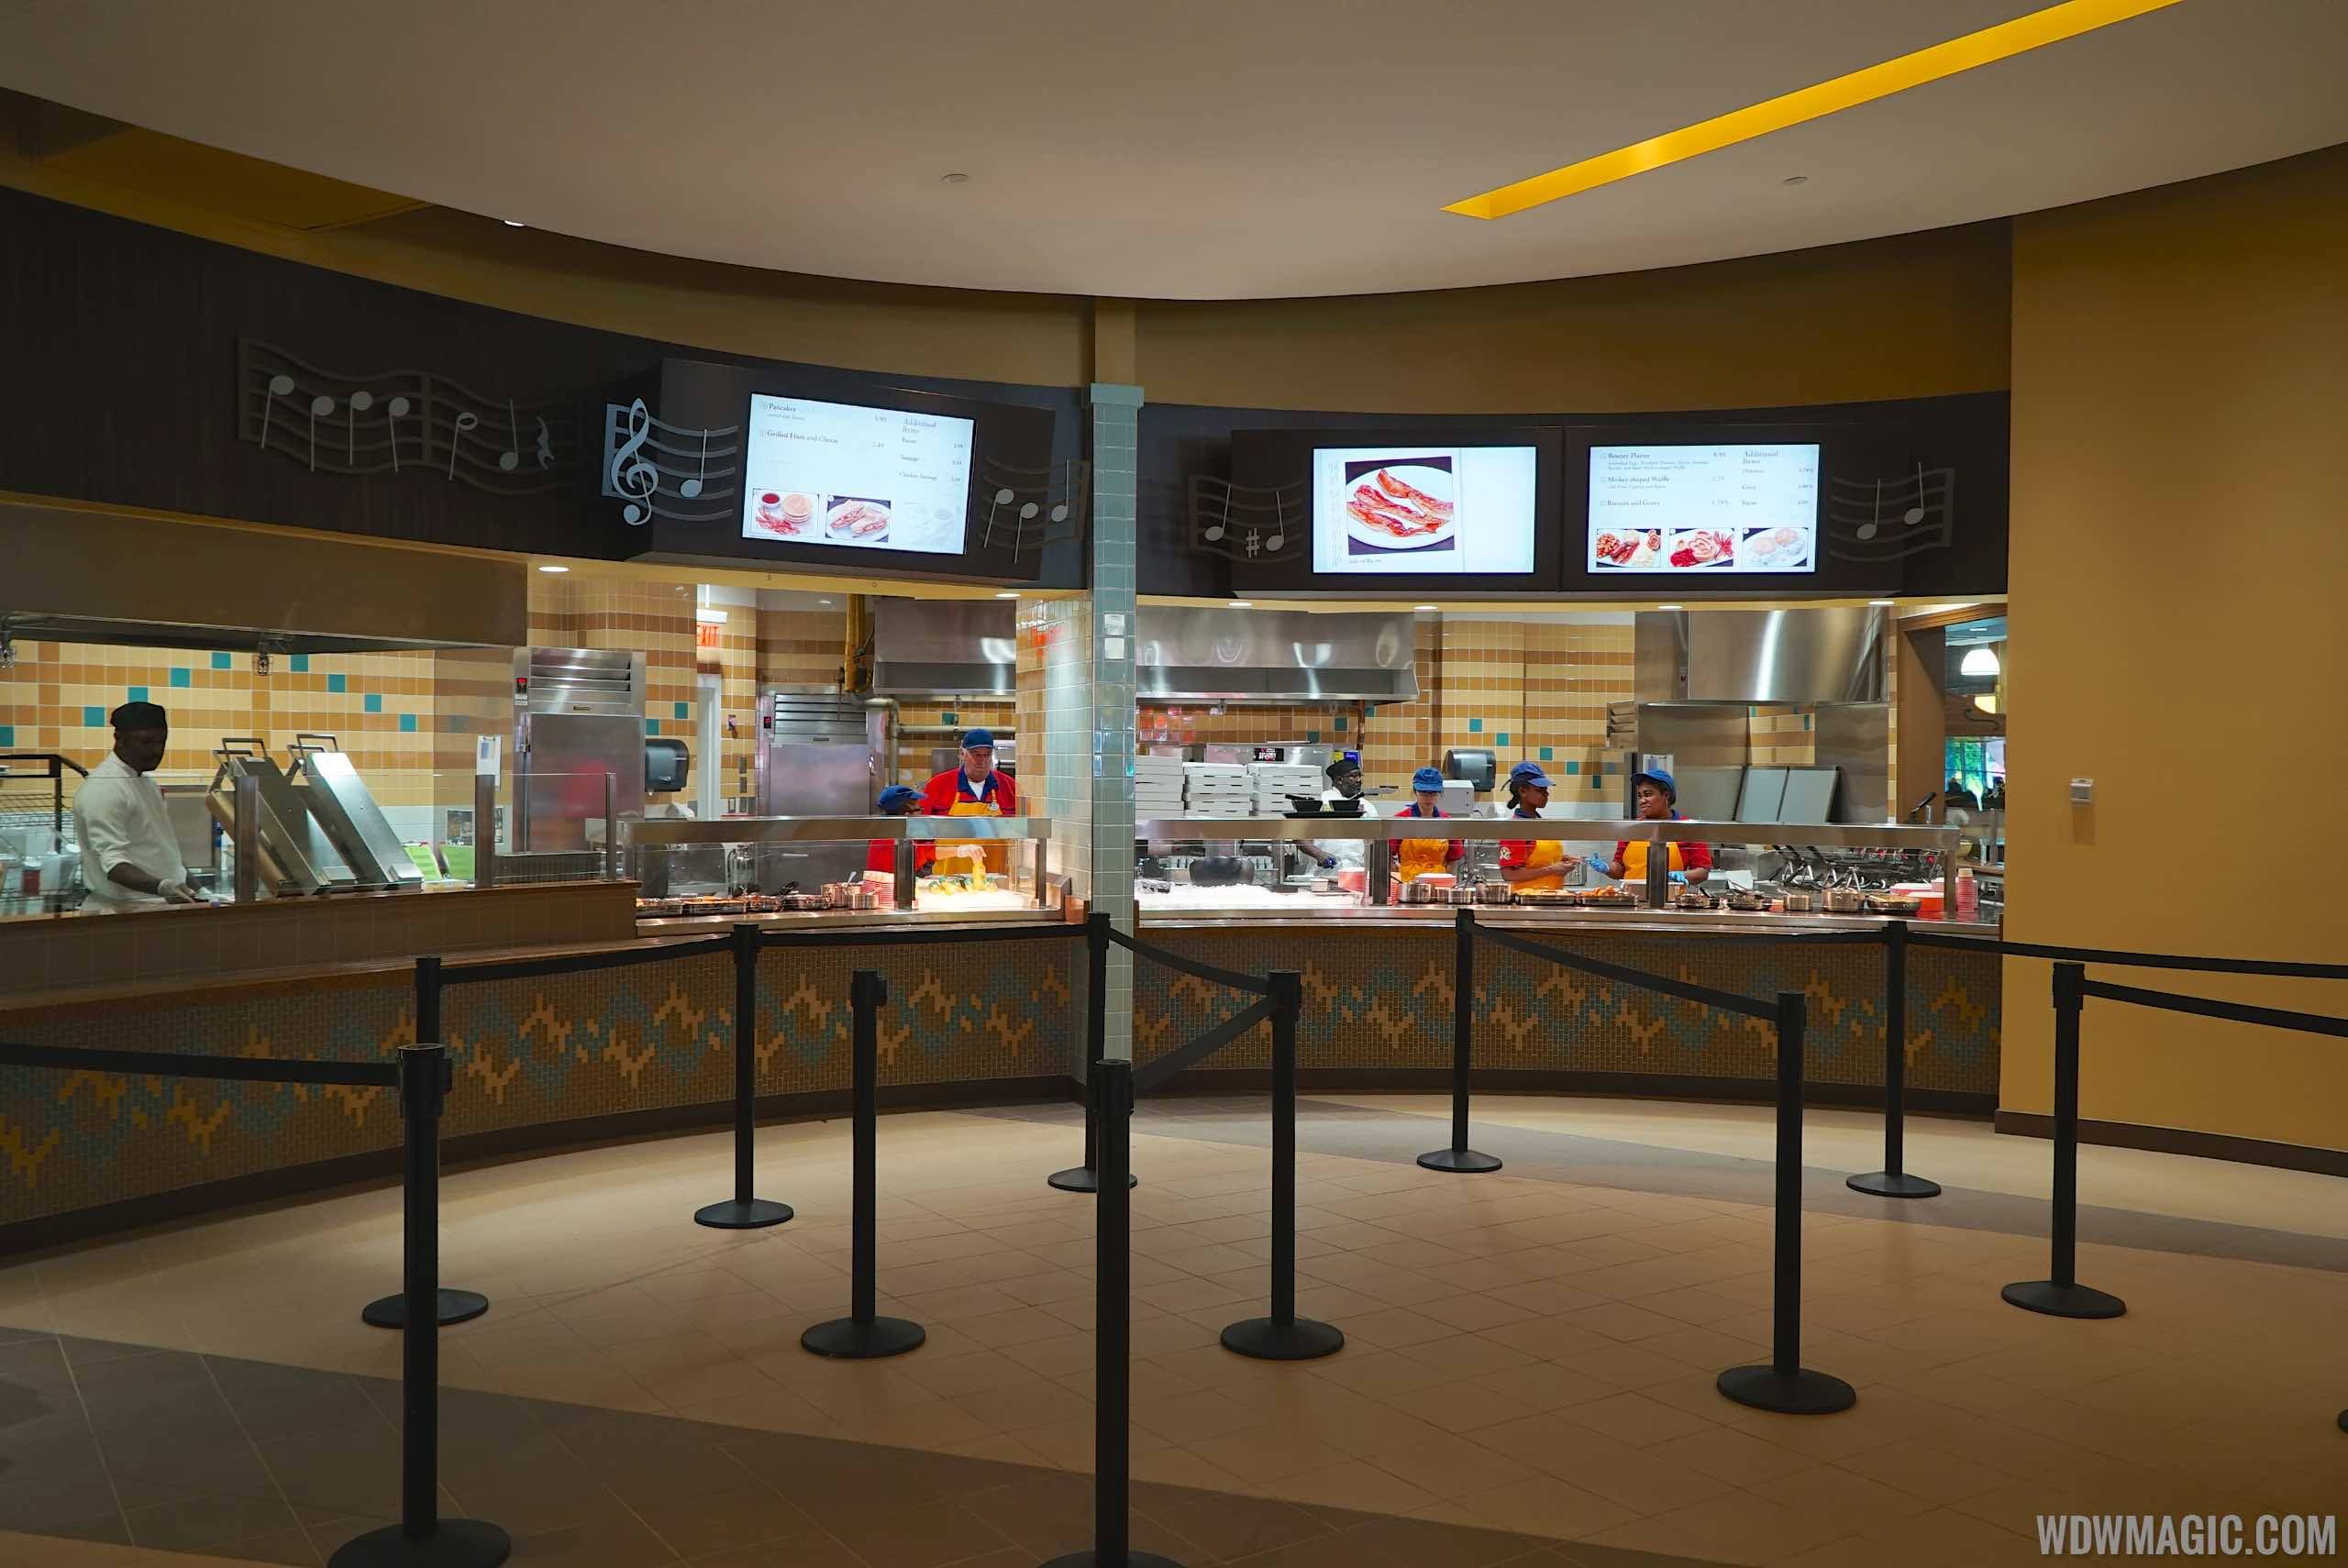 Disney's All Star Music Resort Intermission Food Court reopening earlier than expected